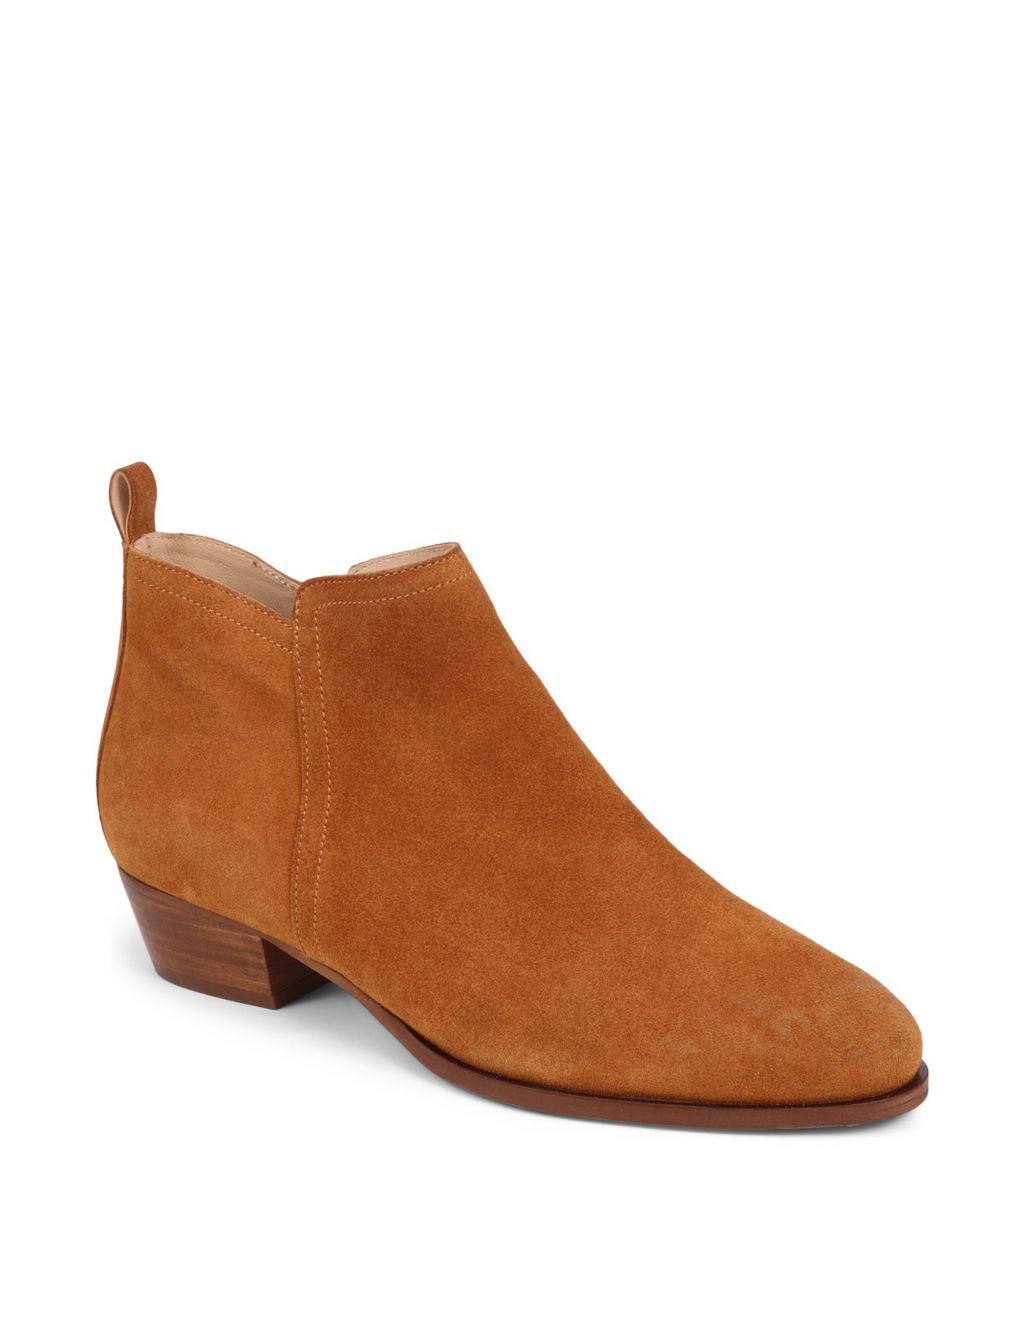 Suede Block Heel Round Toe Ankle Boots image 3